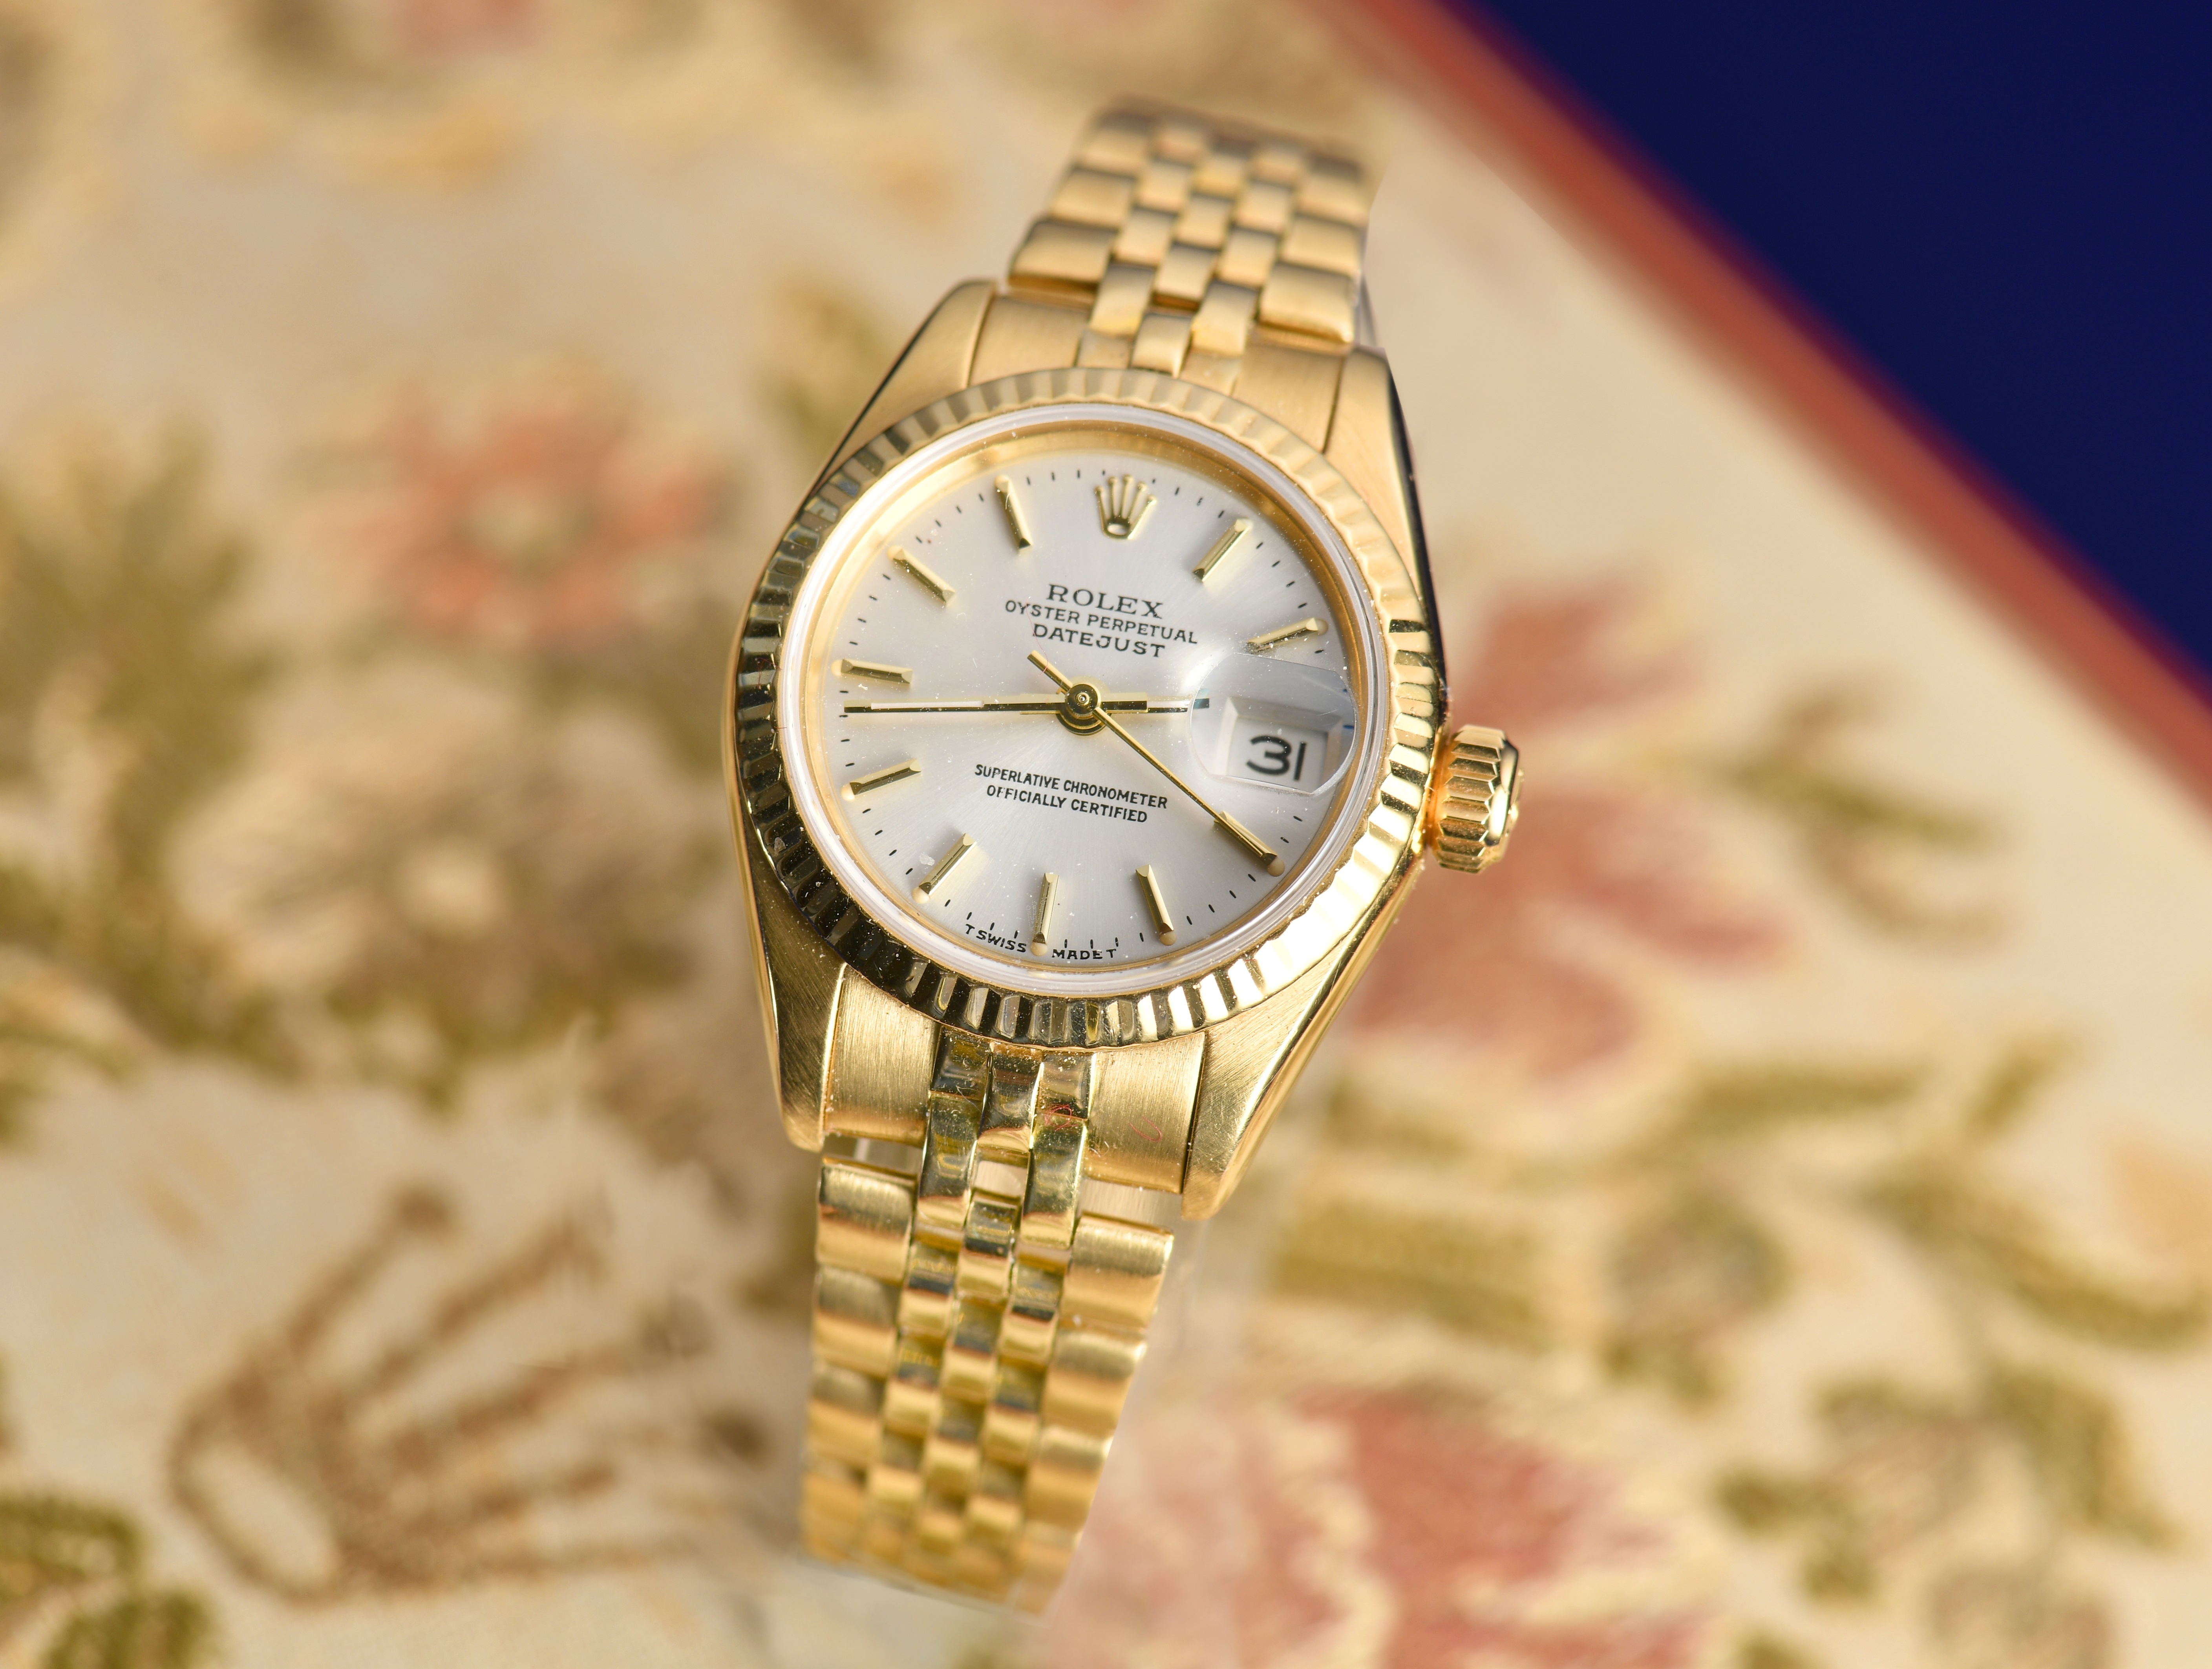 Rolex Oyster Perpetual Datejust 18ct gold ladies automatic wristwatch ref. 69178 with date aperture, - Image 2 of 2